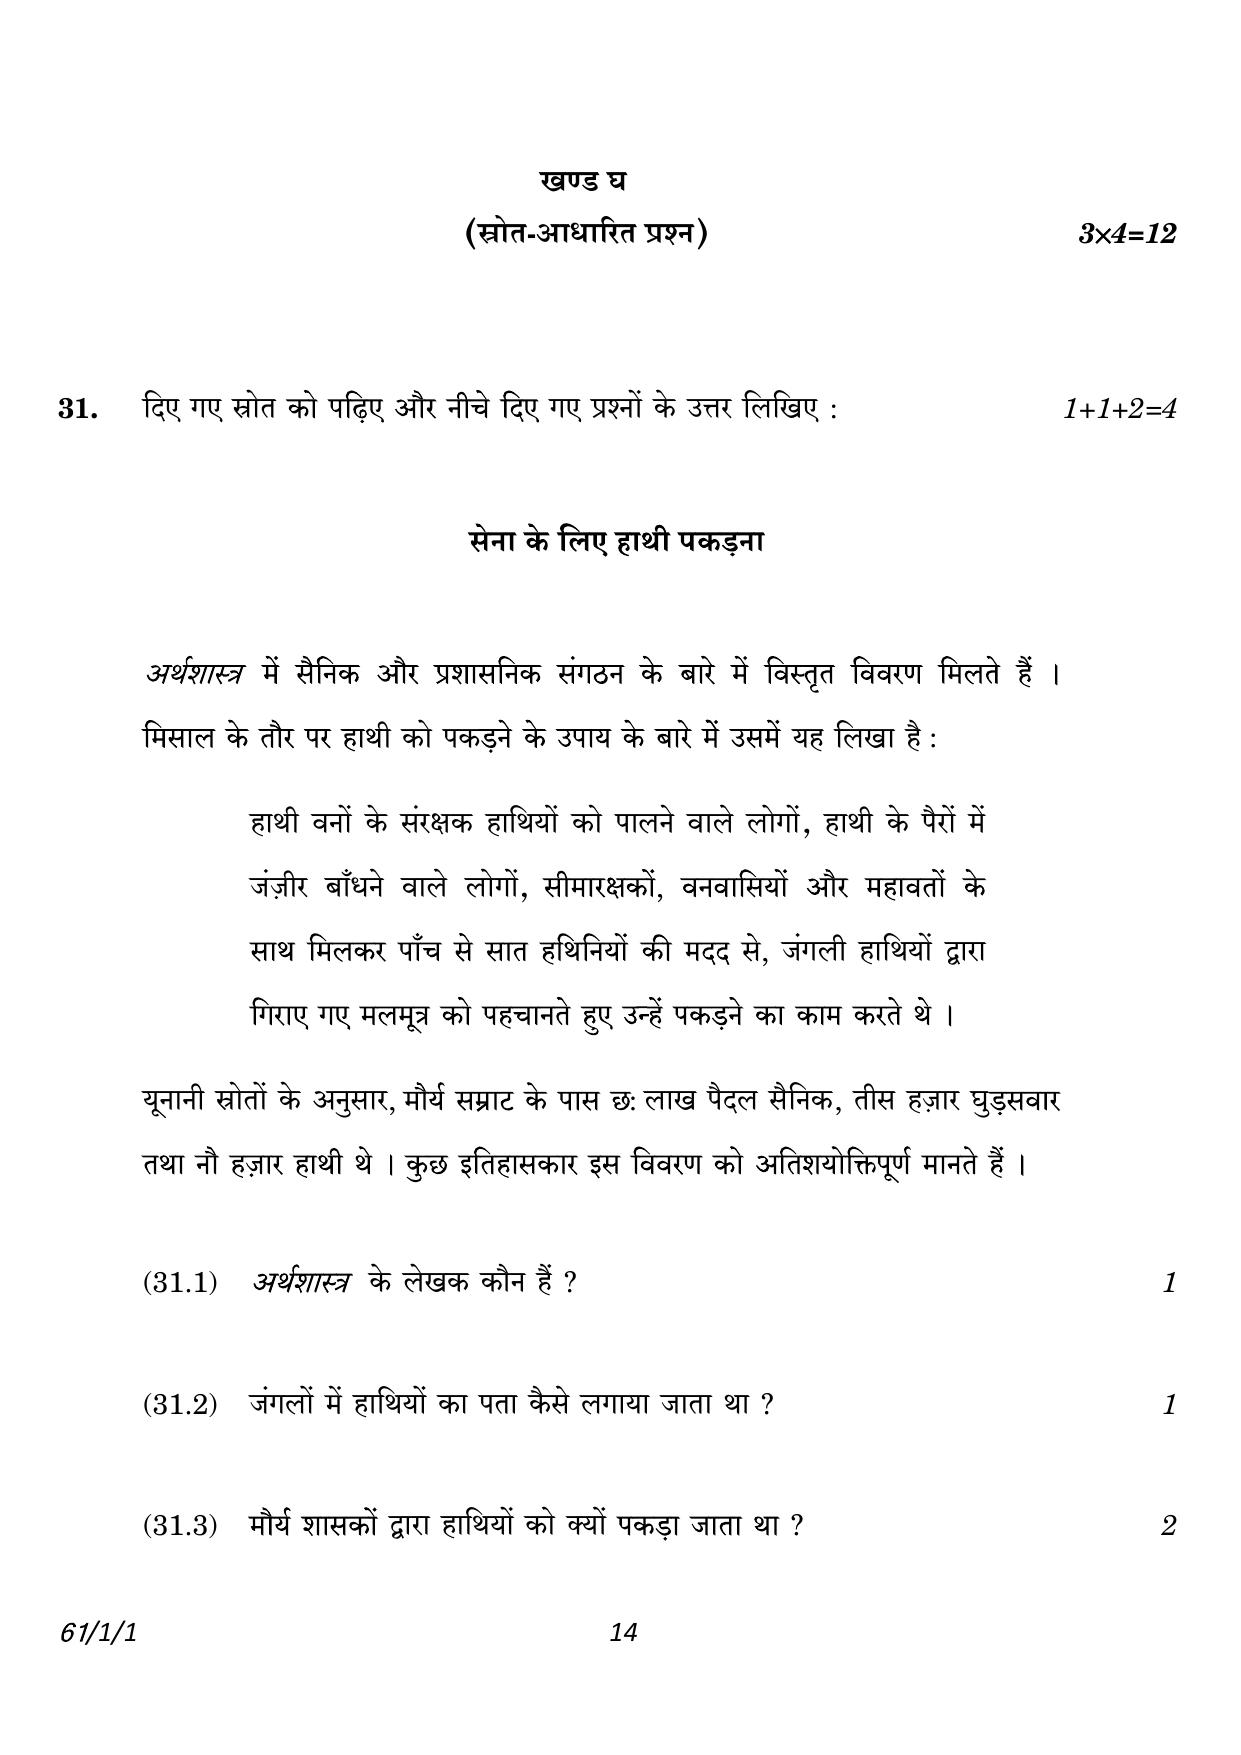 CBSE Class 12 61-1-1 History 2023 Question Paper - Page 14